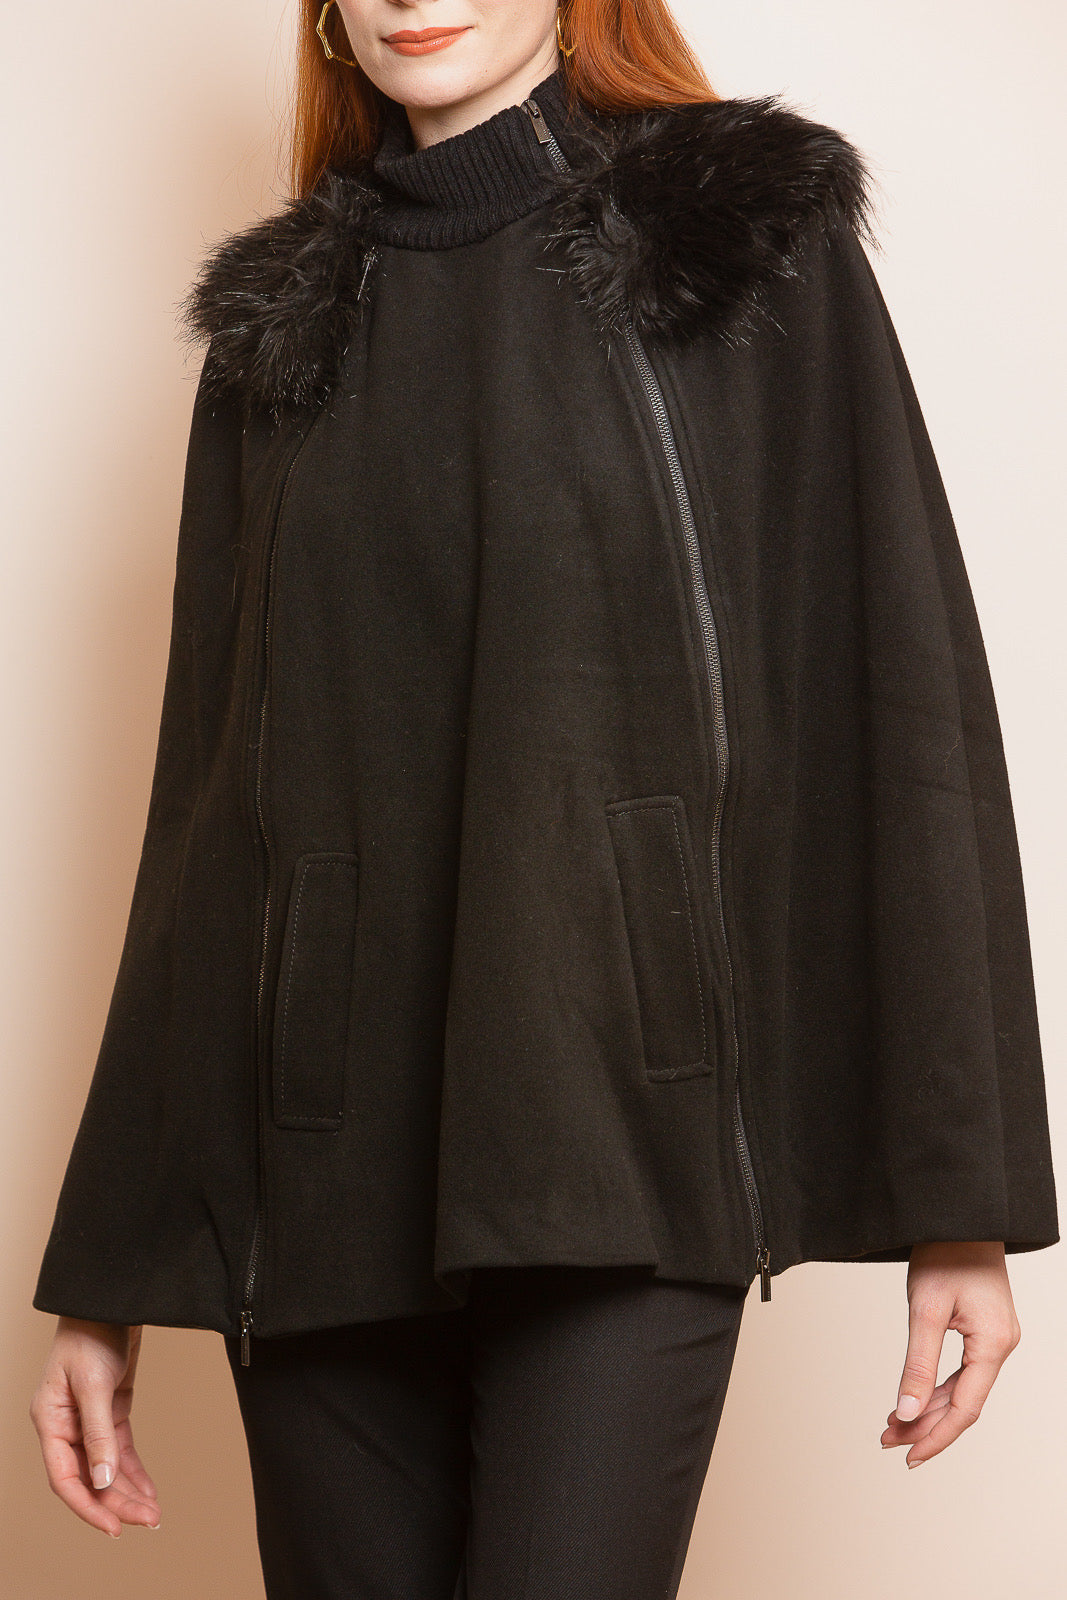 Wool Cape with Front Zipper Detail in Black